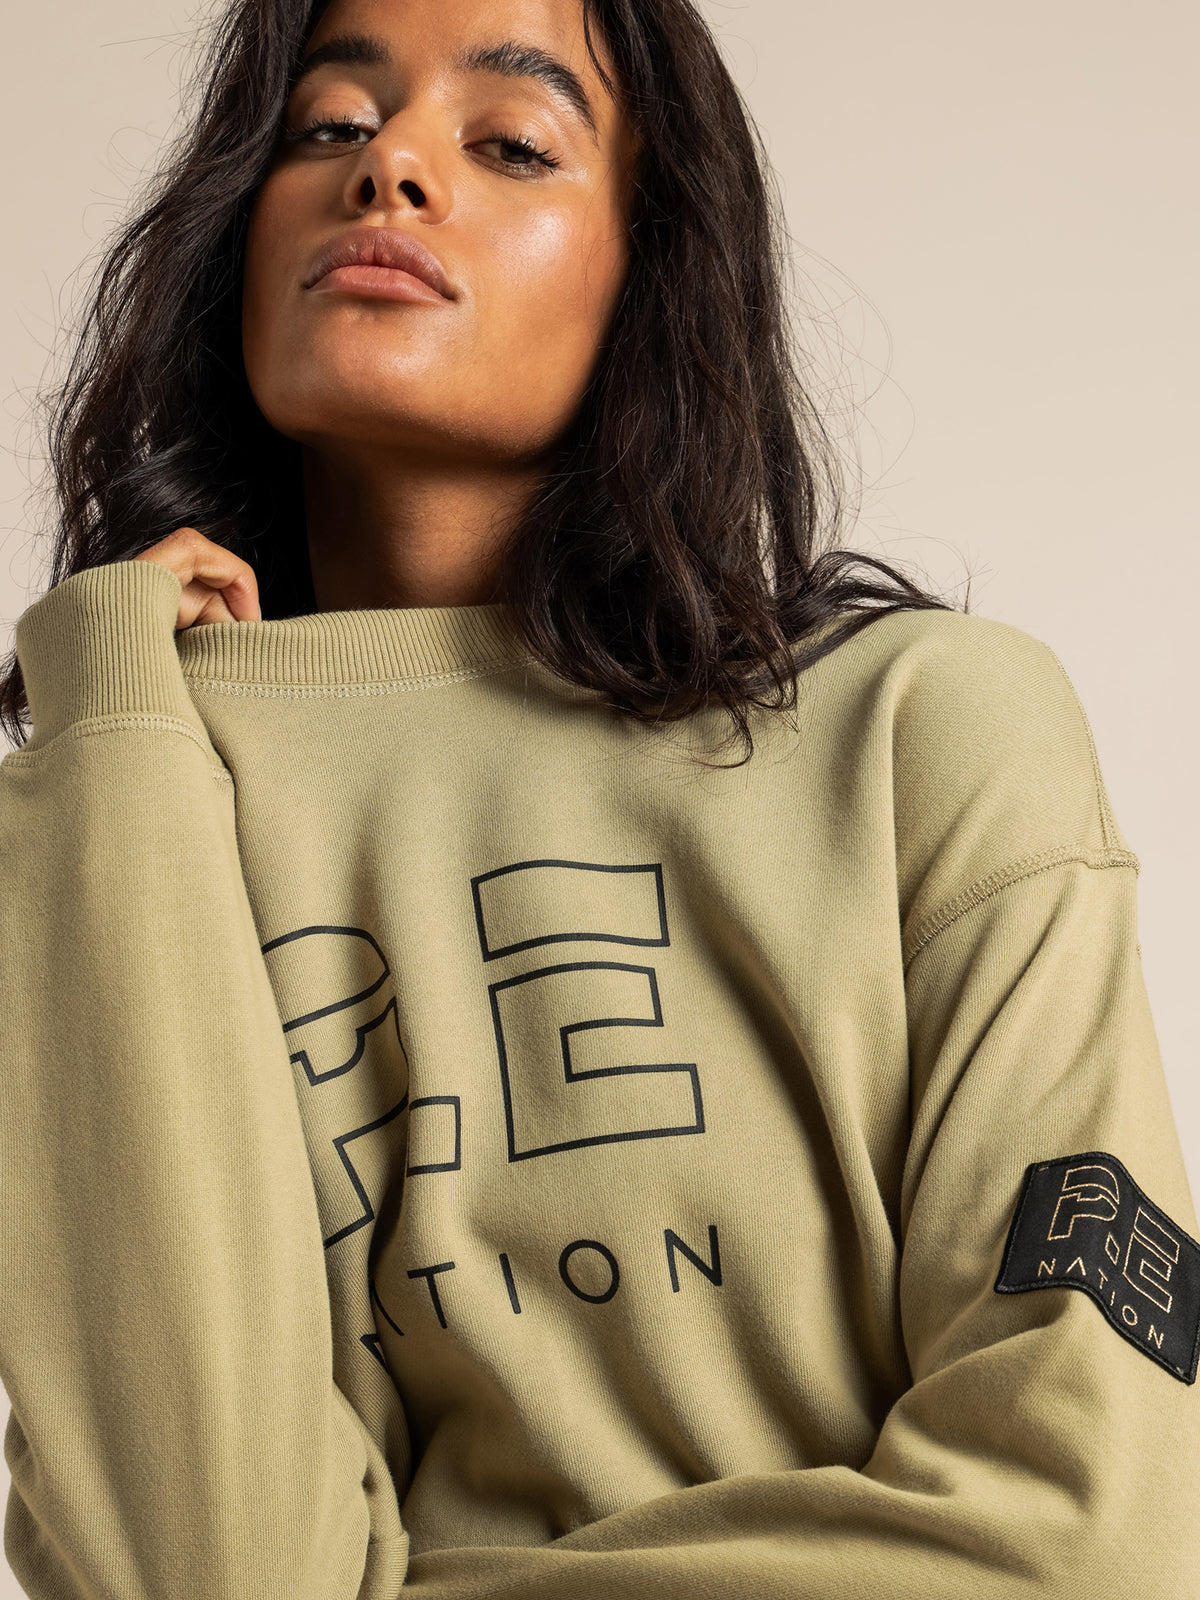 Heads Up Sweat in Olive Gray